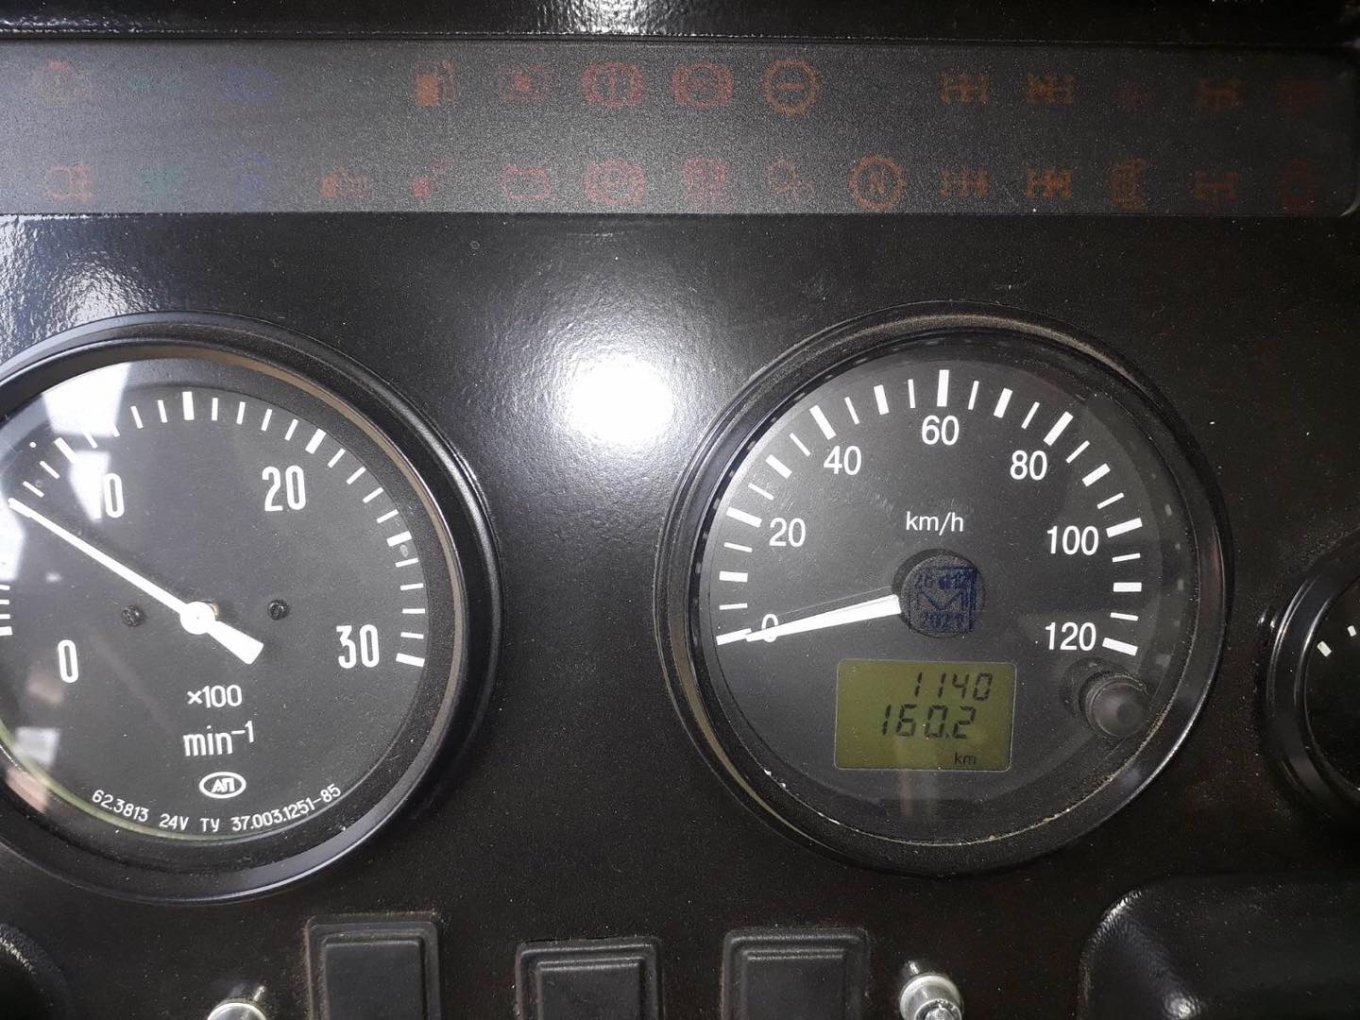 Defense Express / Photo of speedometer shows that mileage of Tornado-U armored truck previously captured by the Ukrainian military does not exceed 161 km